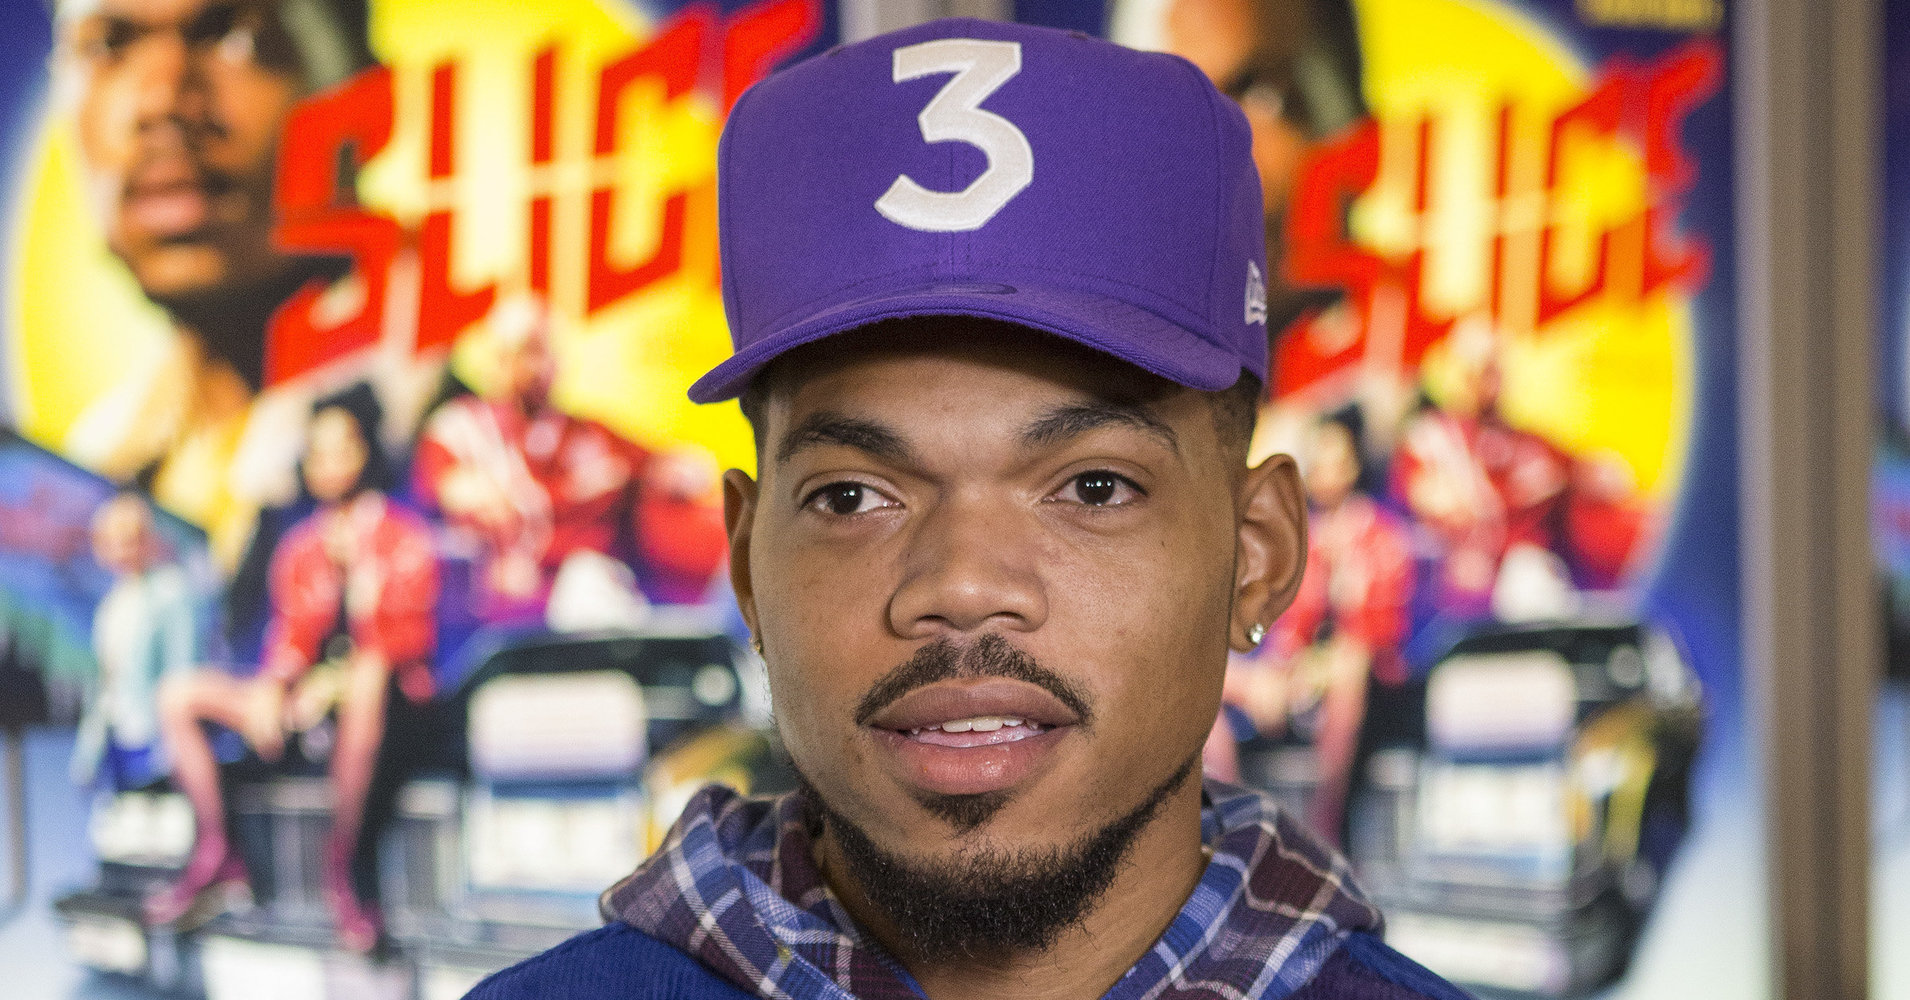 Chance The Rapper Donates $1 Million To Mental Health Services in Chicago